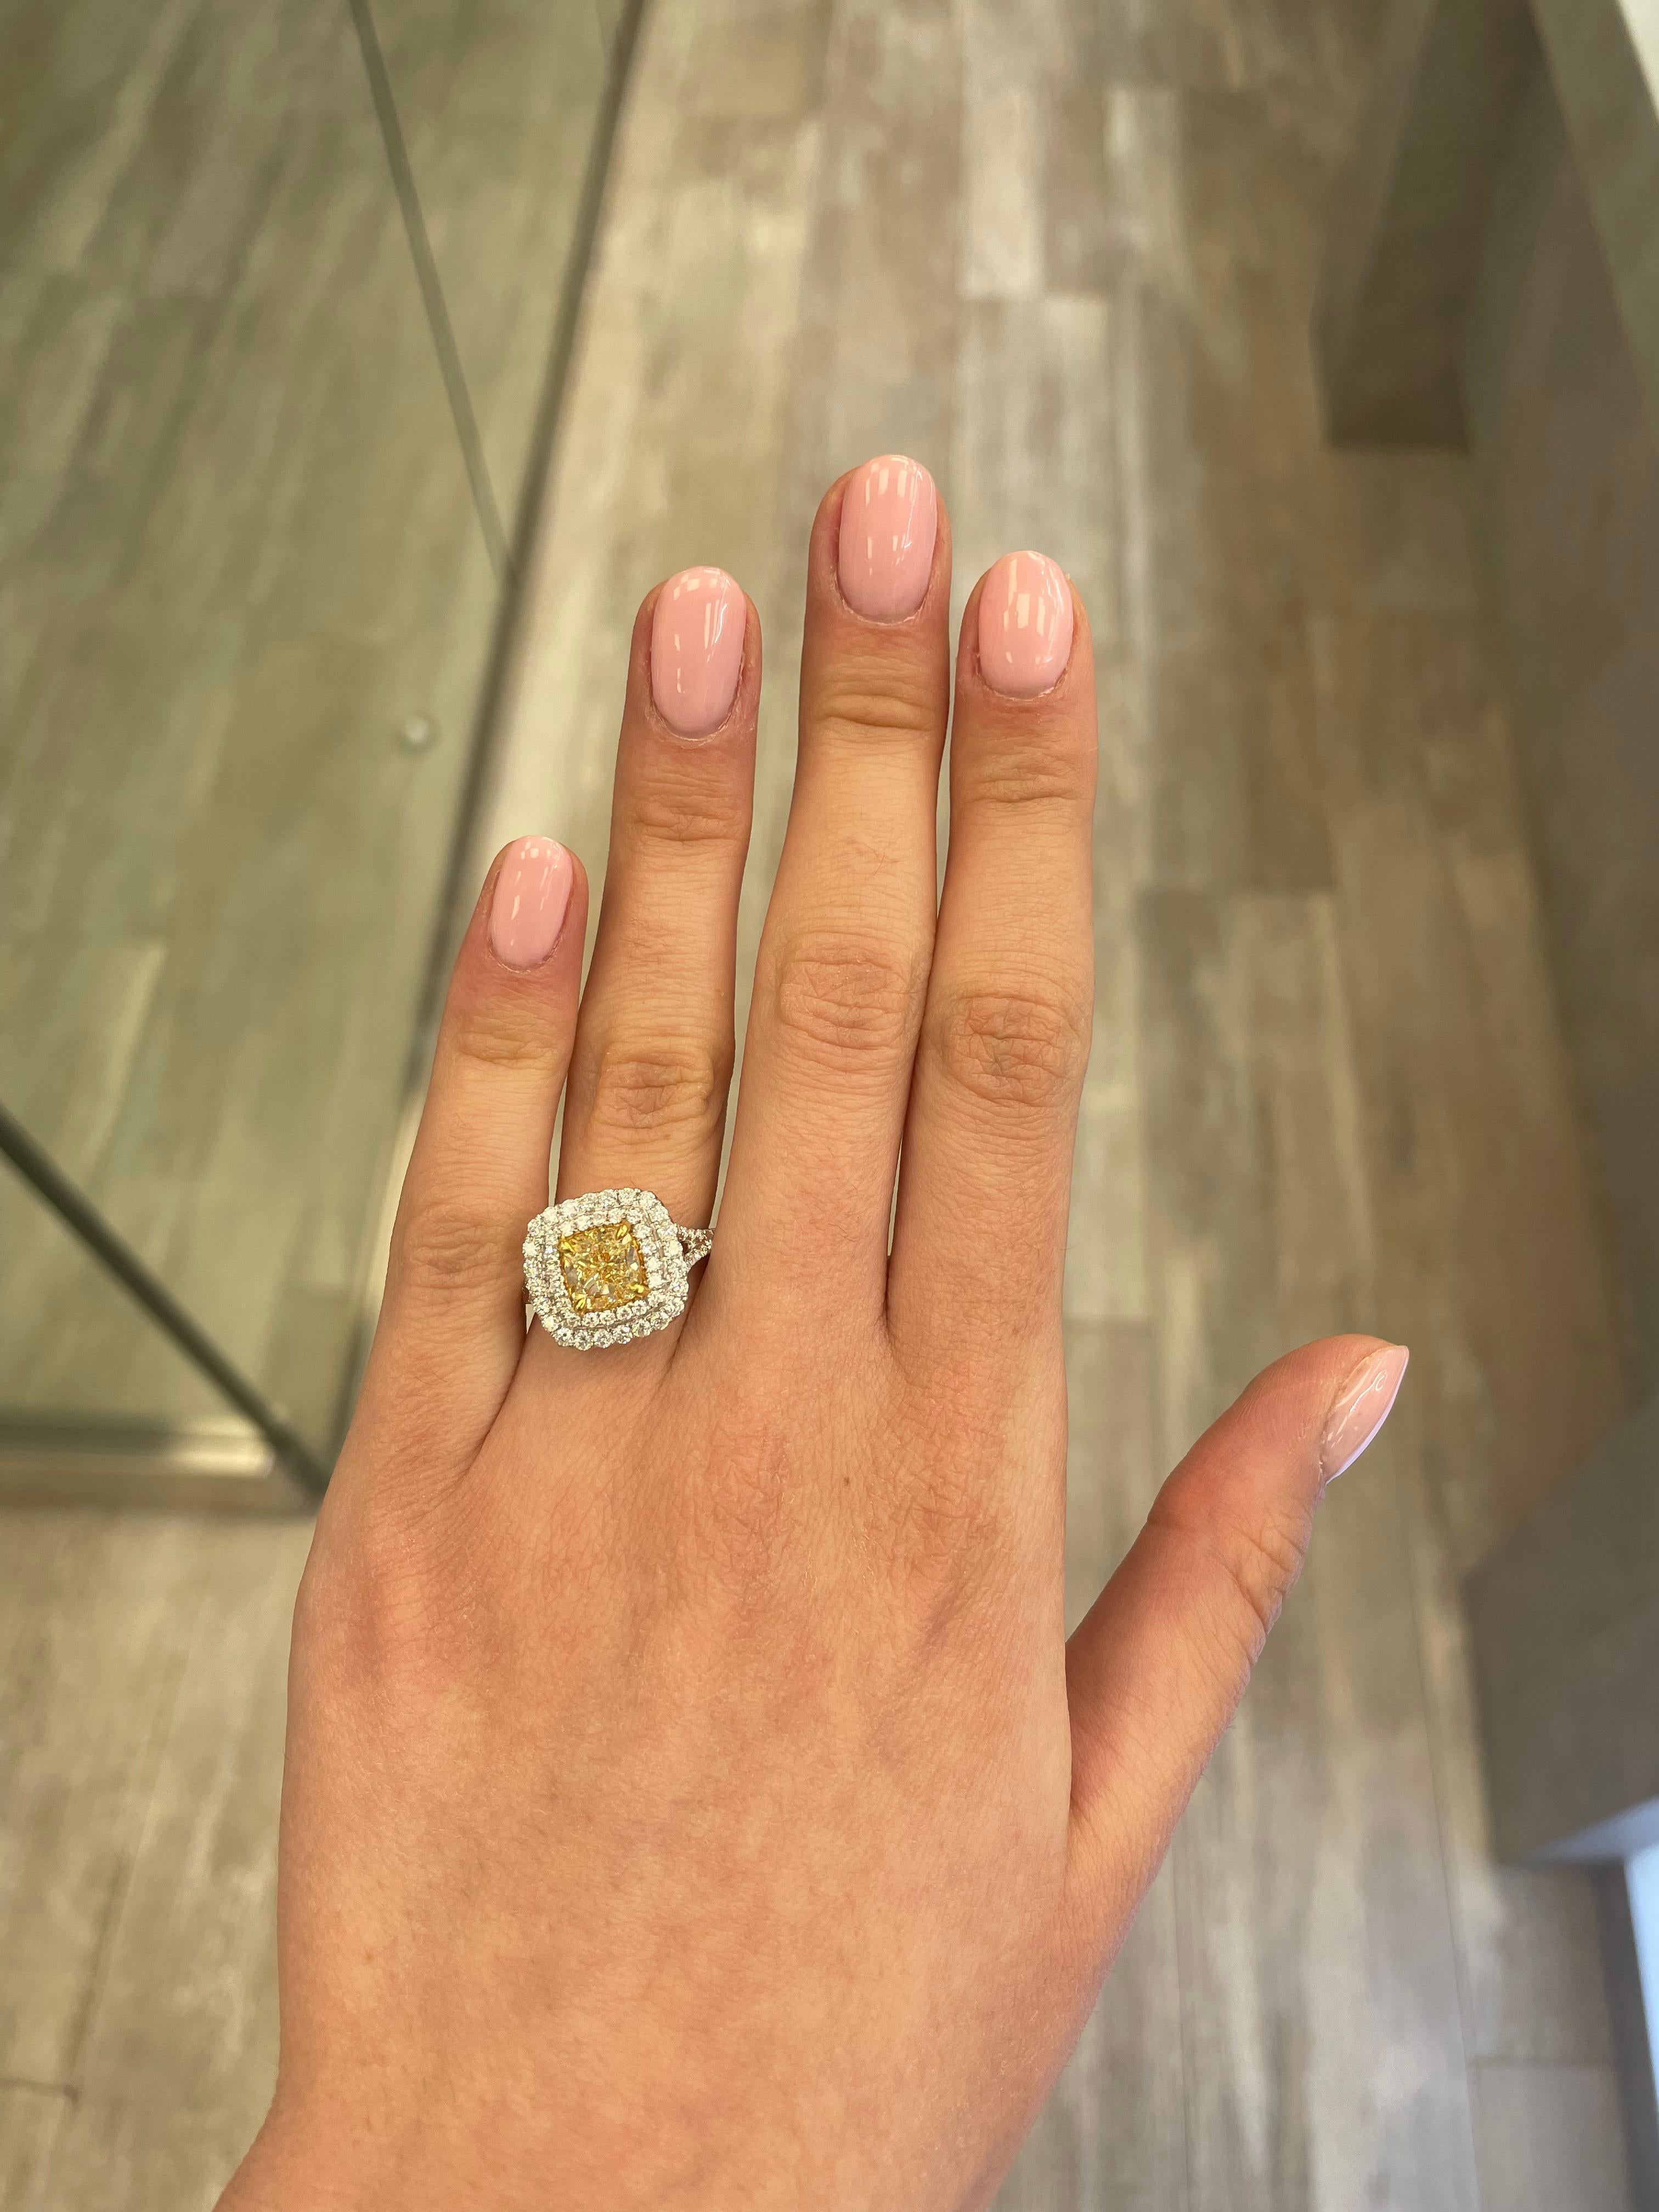 Stunning modern EGL certified yellow diamond double halo ring, two-tone 18k yellow and white gold. By Alexander Beverly Hills
2.97 carats total diamond weight.
2.02 carat cushion cut Fancy Intense Yellow color and VS2 clarity diamond, EGL graded in